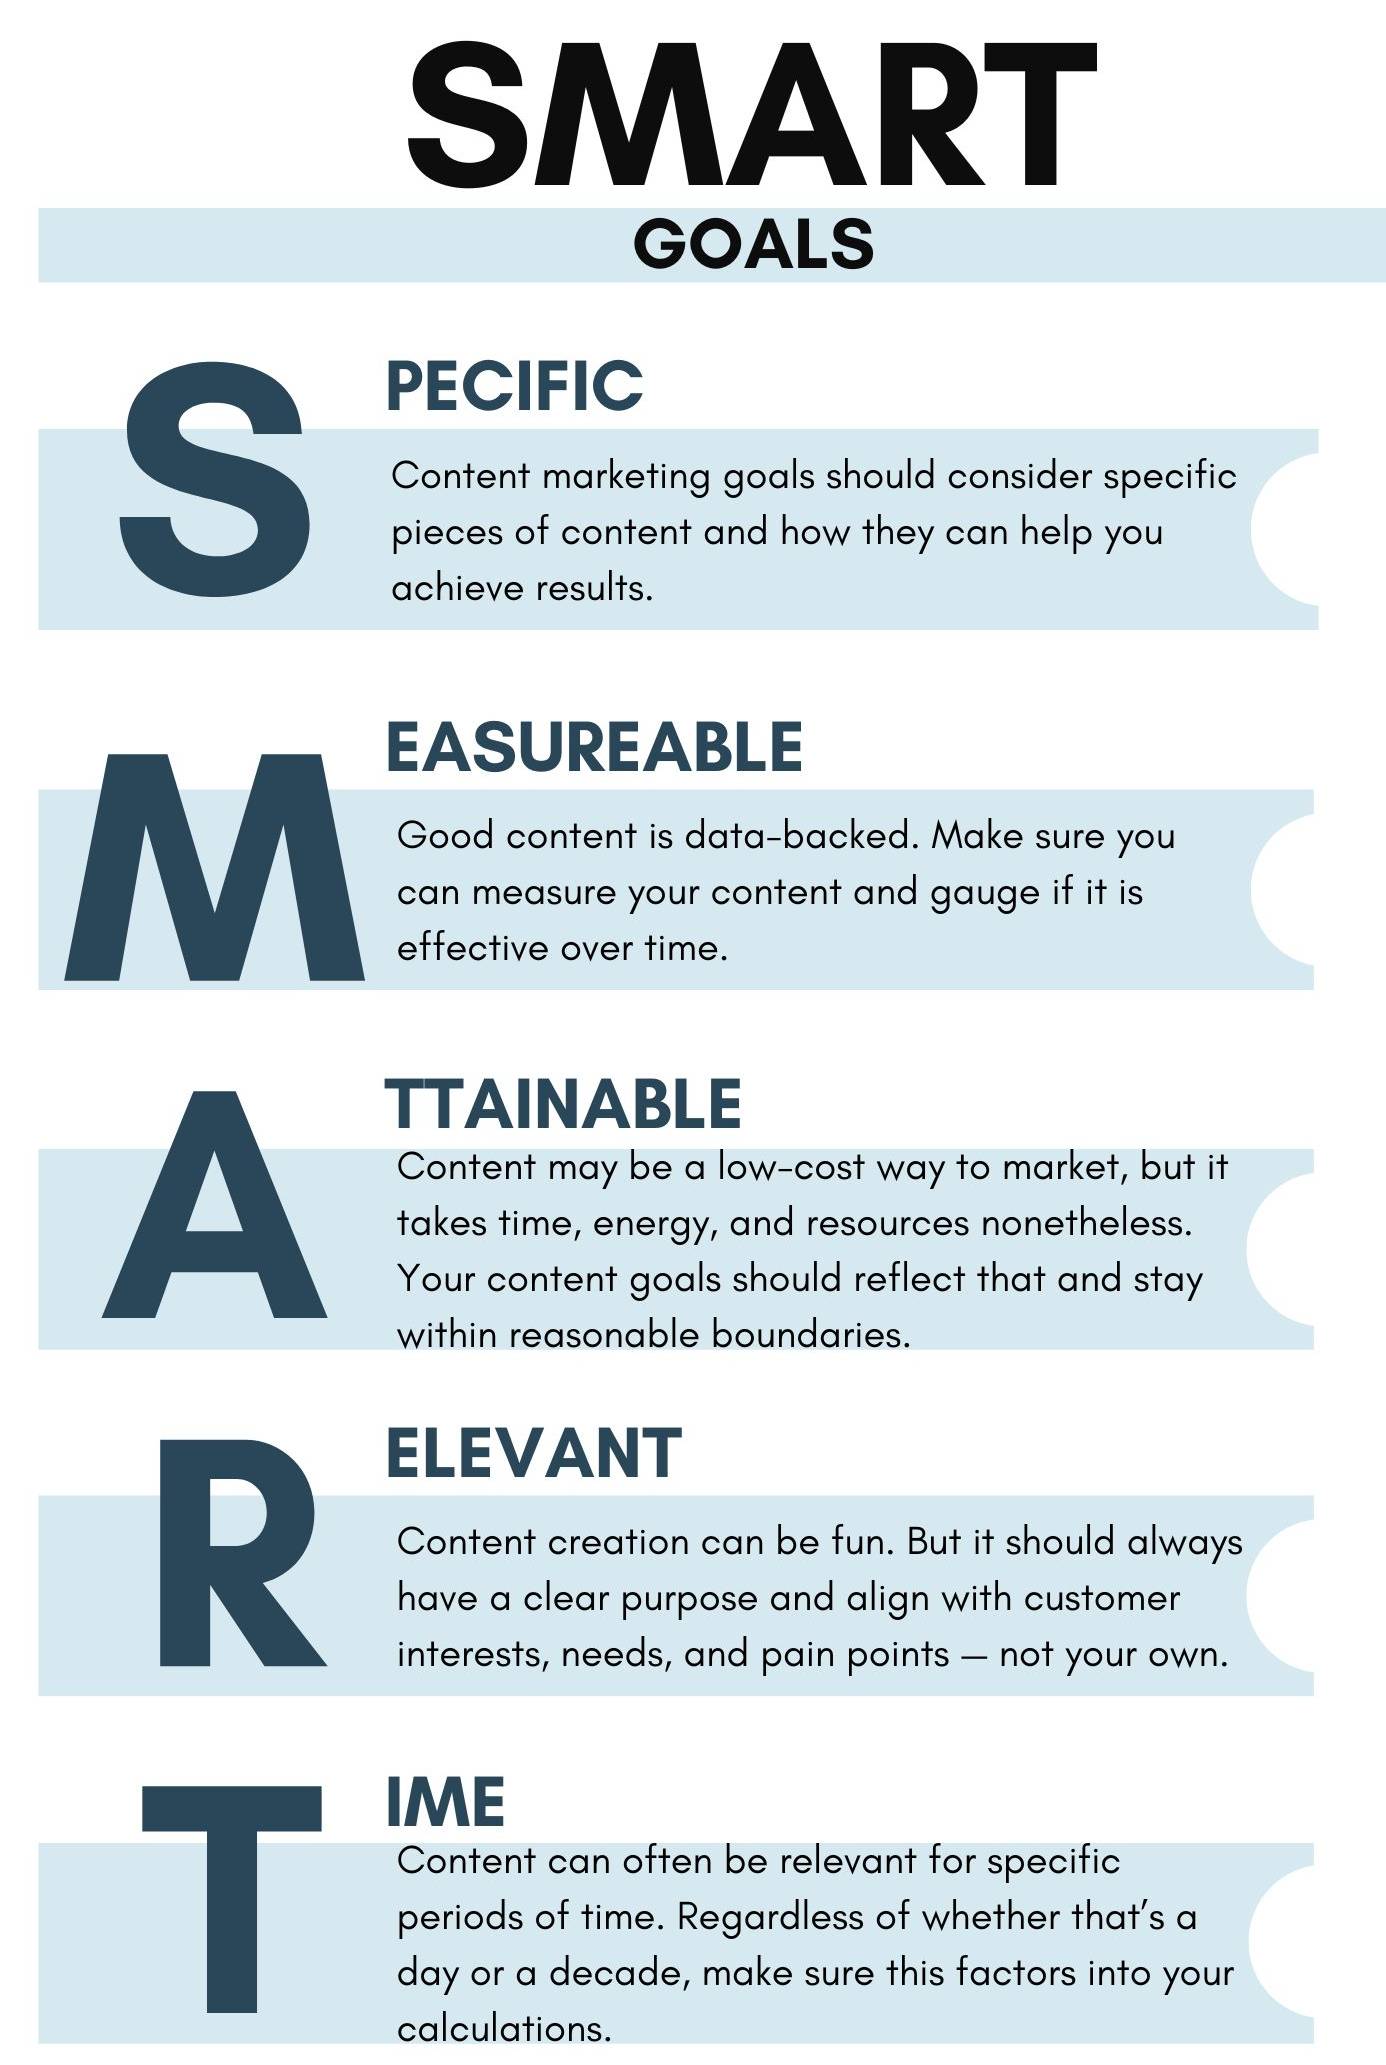 SMART goals lining out how to achieve content marketing objectives